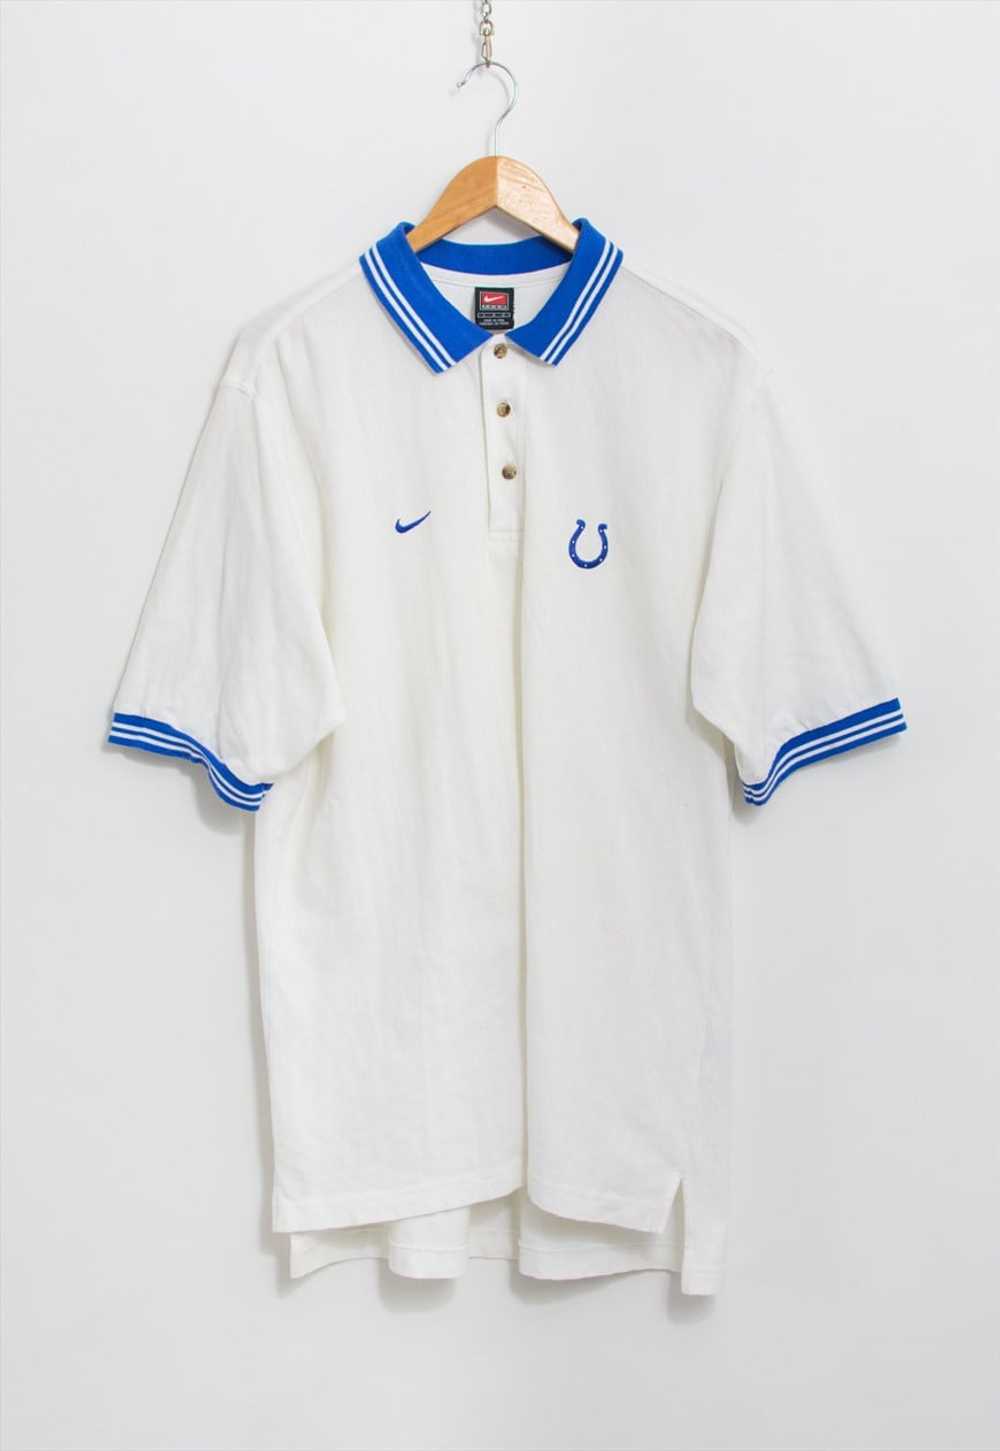 Nike 90's polo shirt Indianapolis Colts NFL top m… - image 3